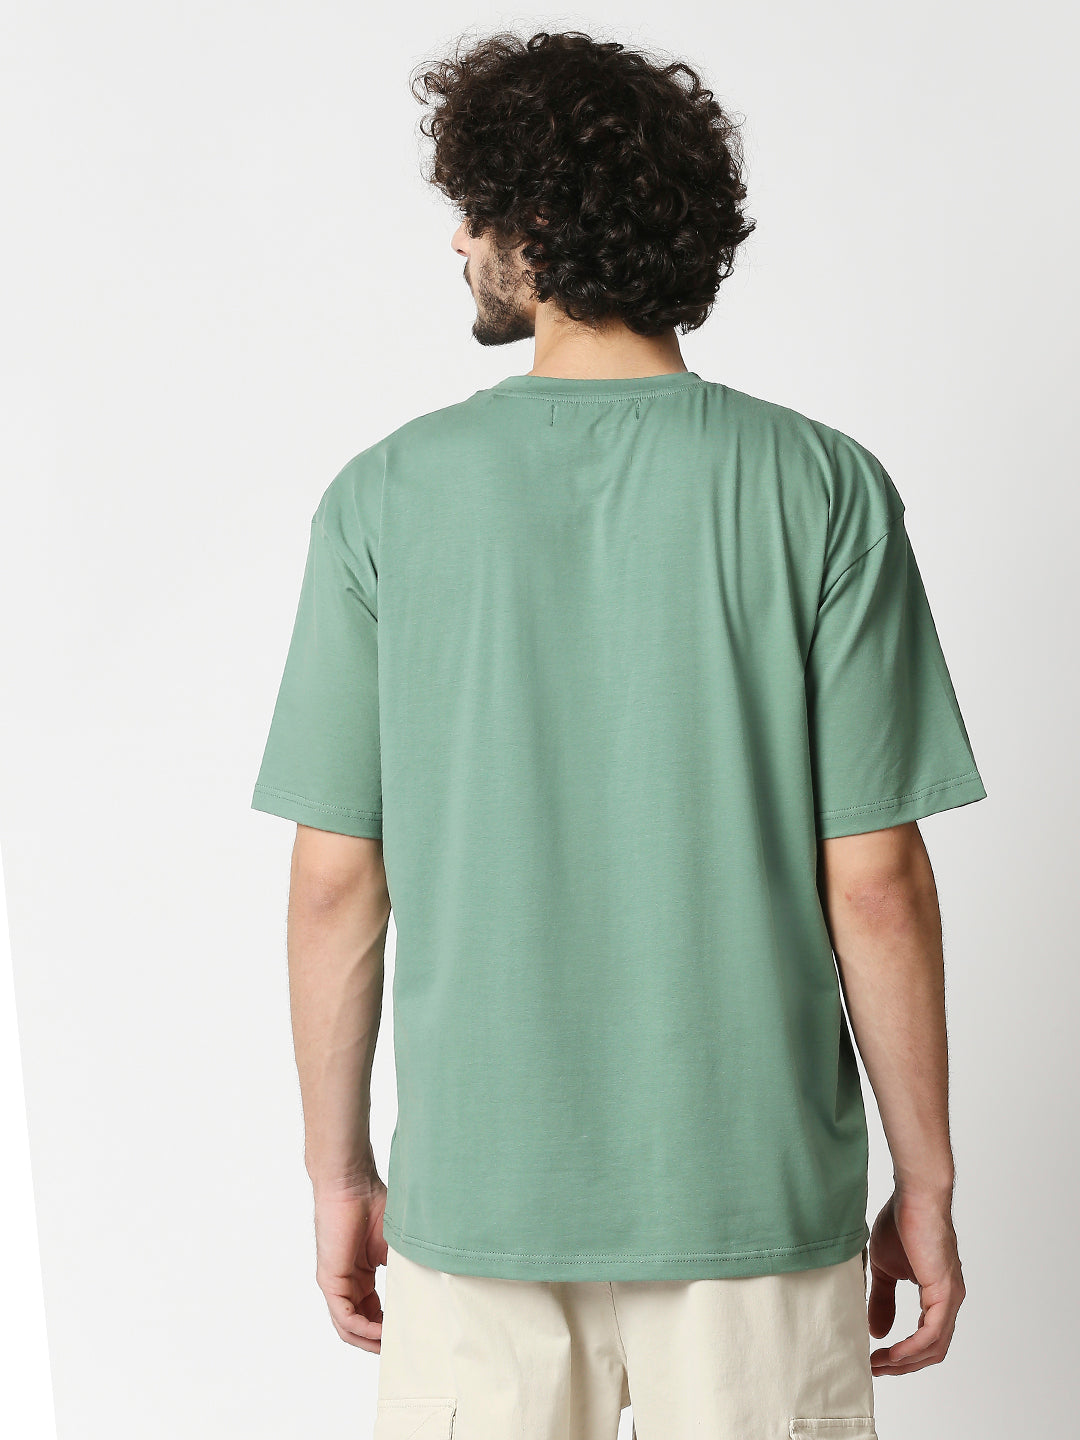 Buy Men's Over Size Fit Chest print Green Baggy T-Shirt